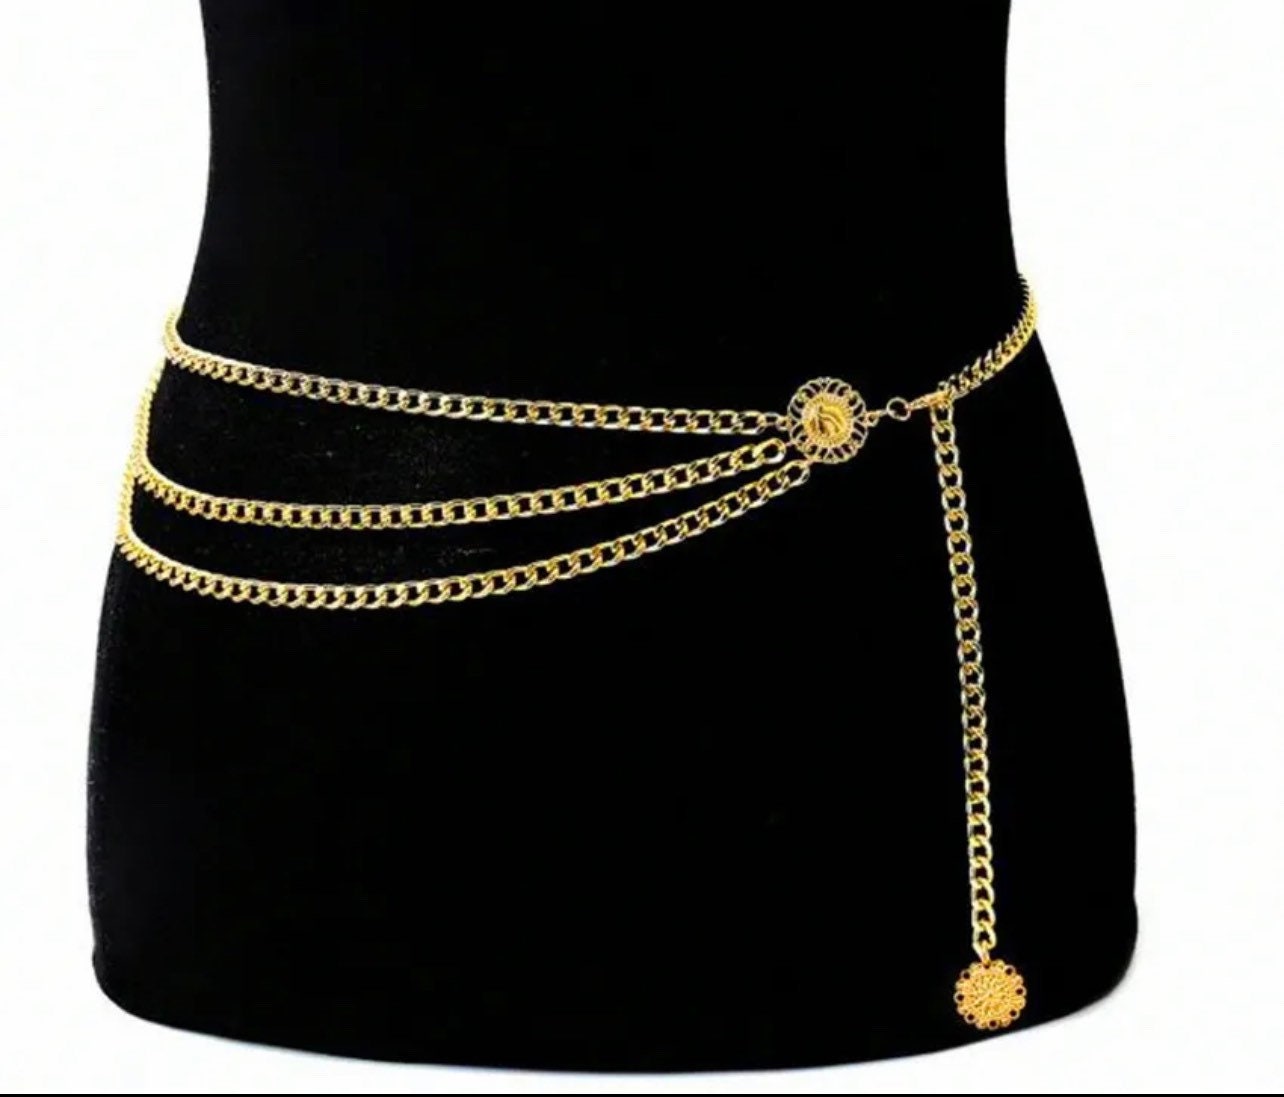 Womenswear Gold Chain Belt, Jewelry Gift for Christmas, New Year